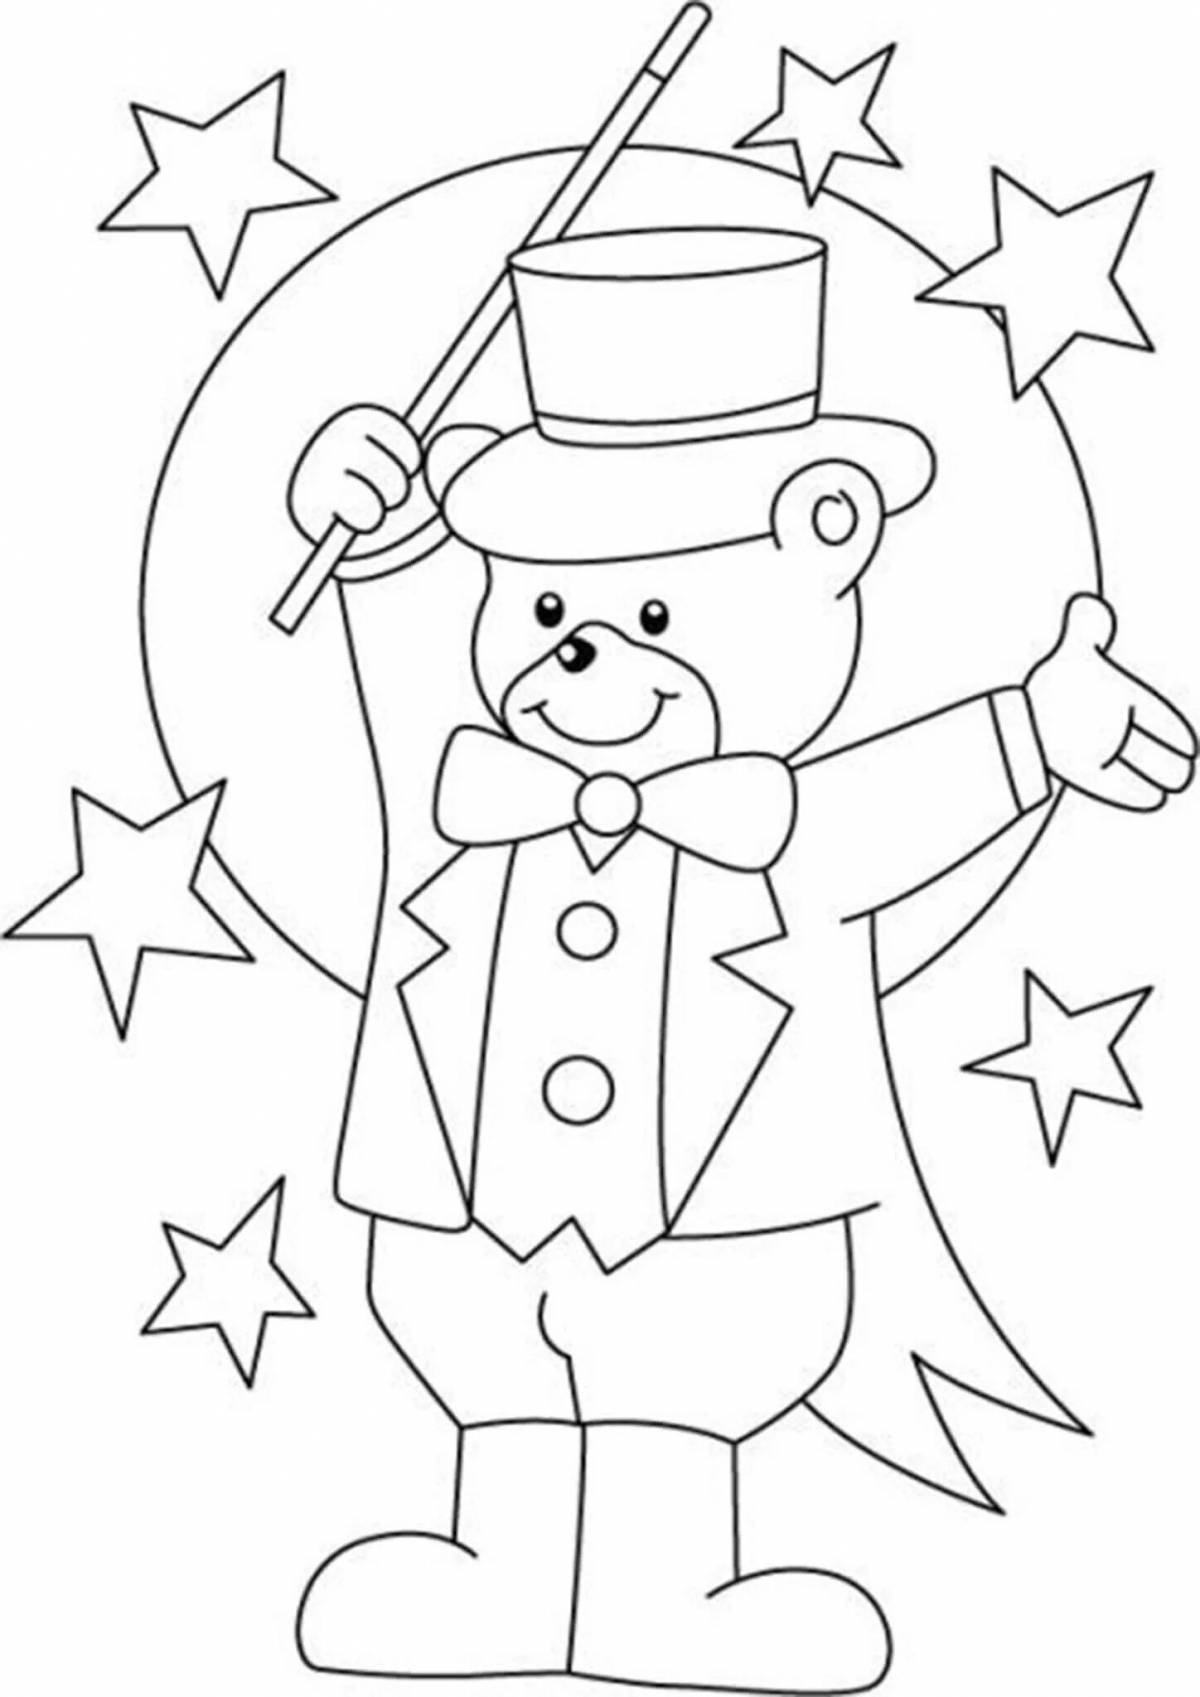 Animated circus coloring book for kids